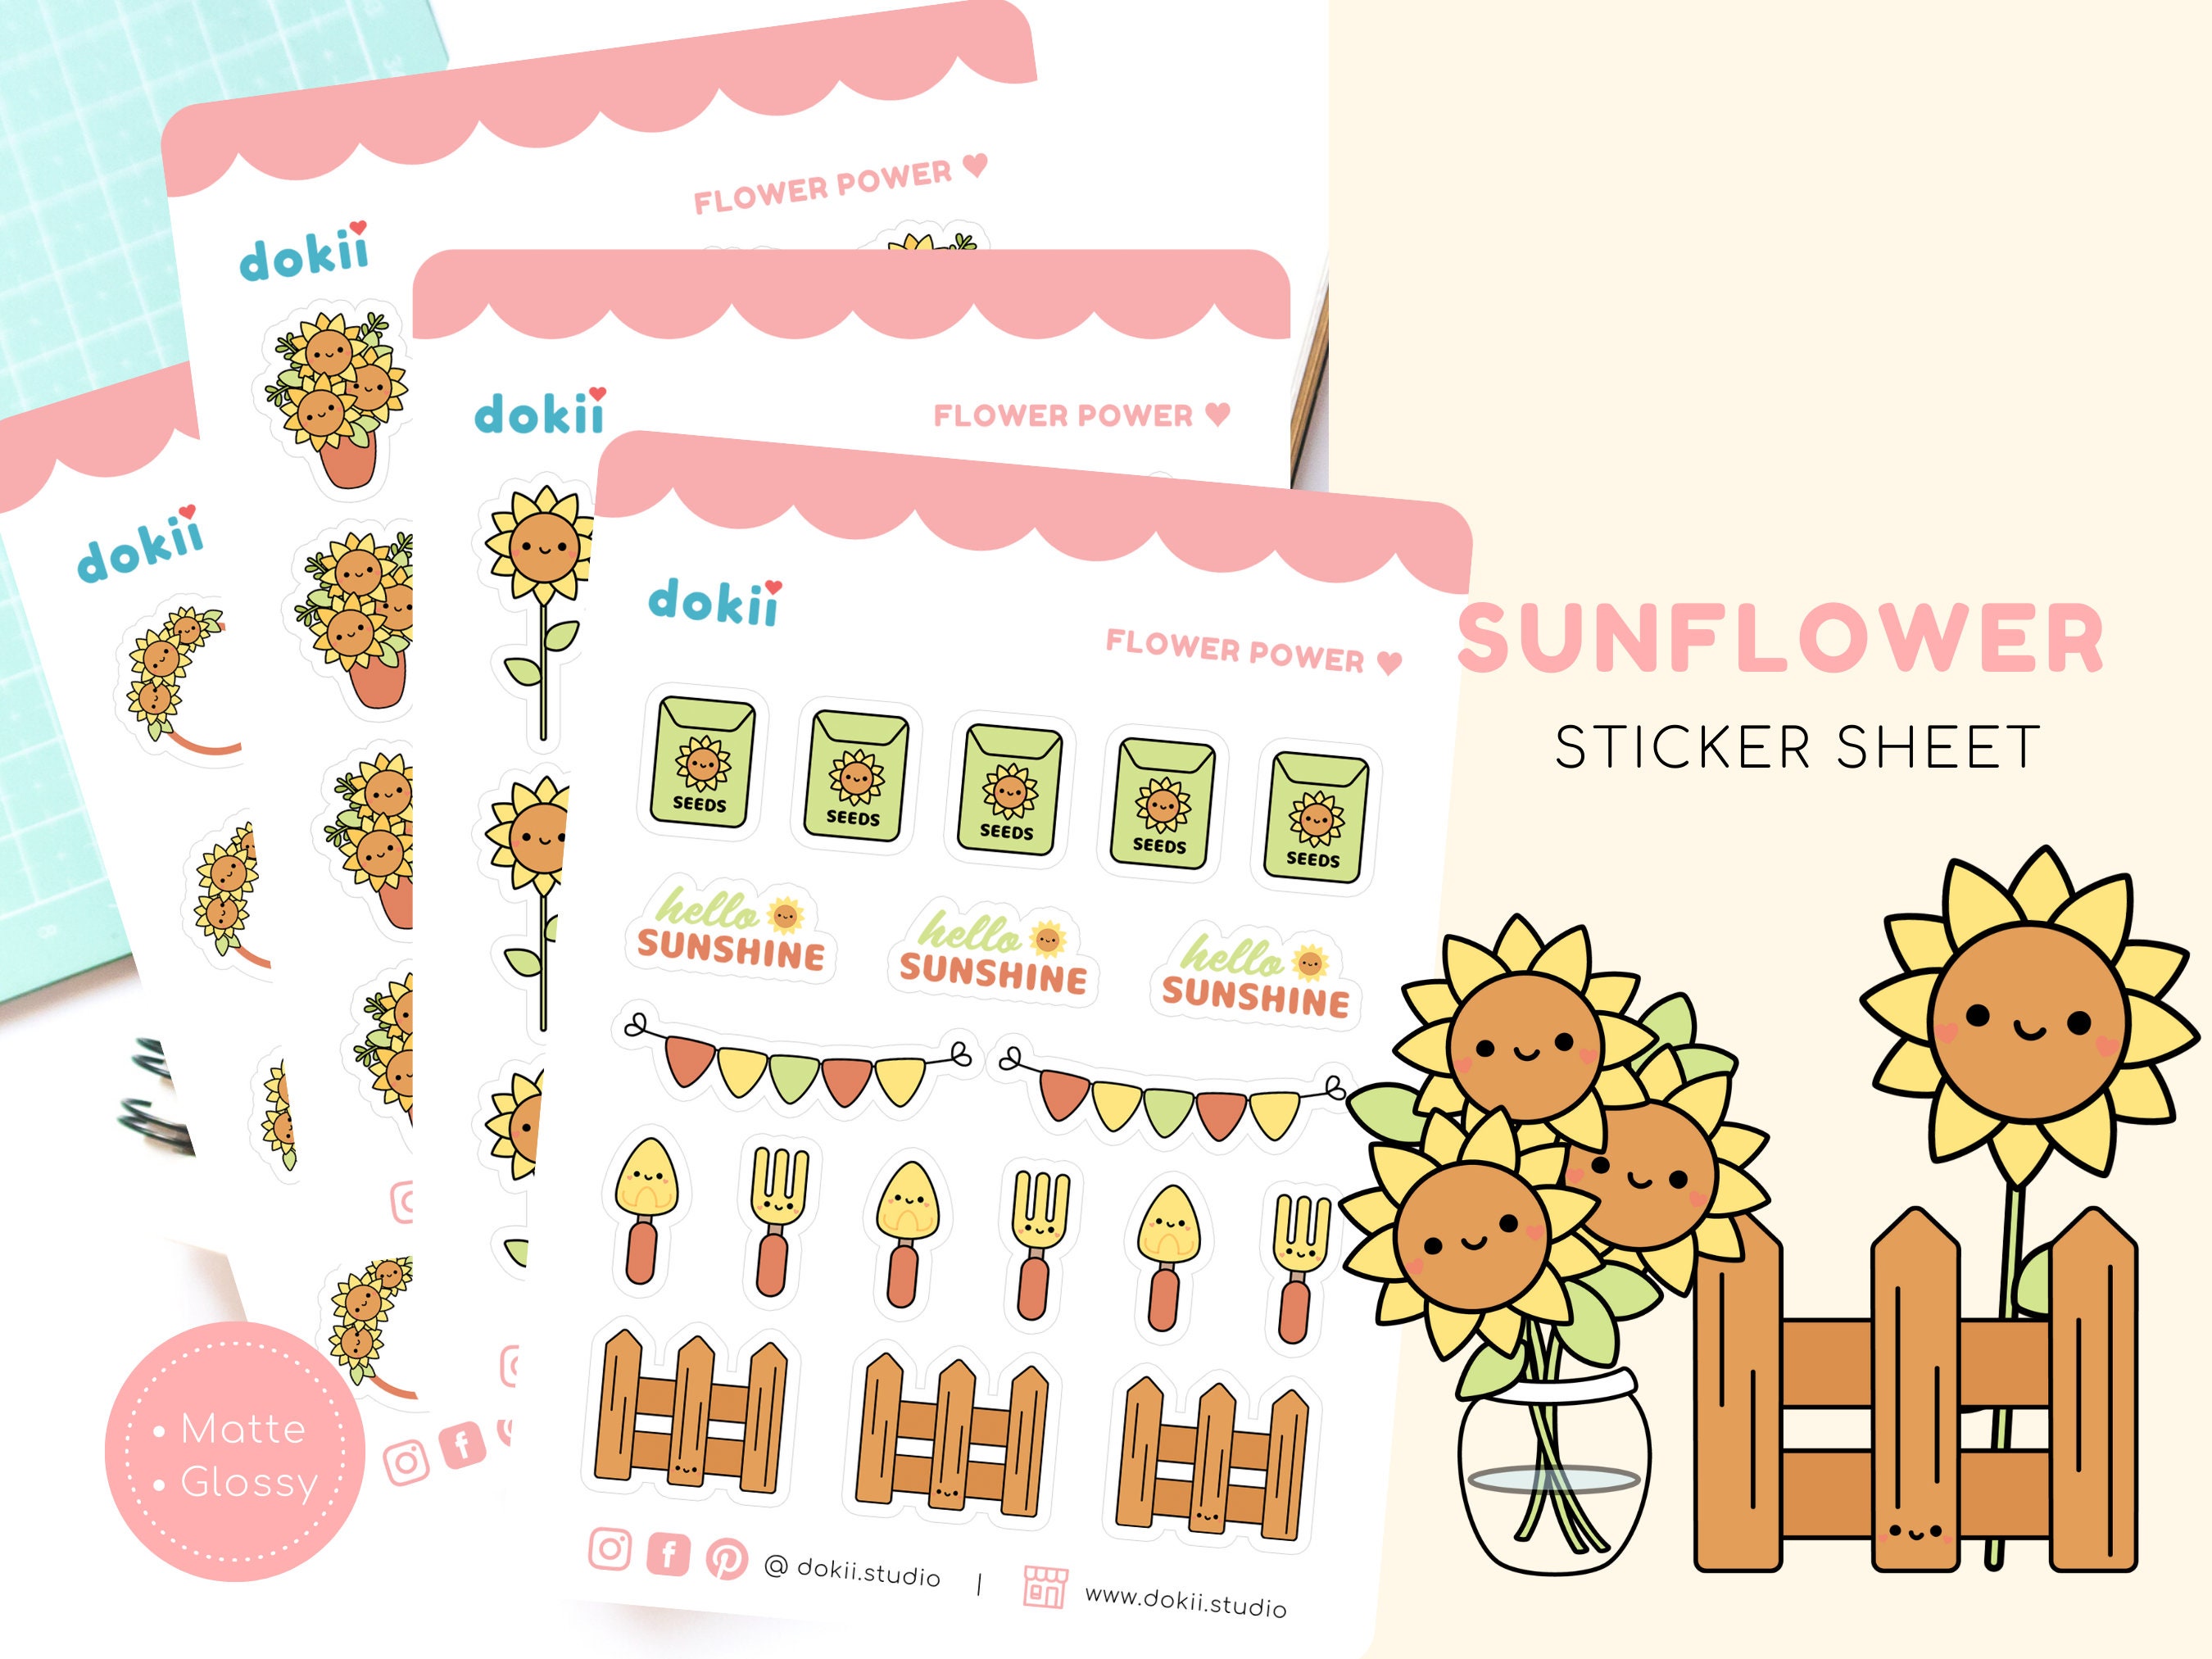 Trash Day Luna Stickers Planner Stickers Cute Character Girl 